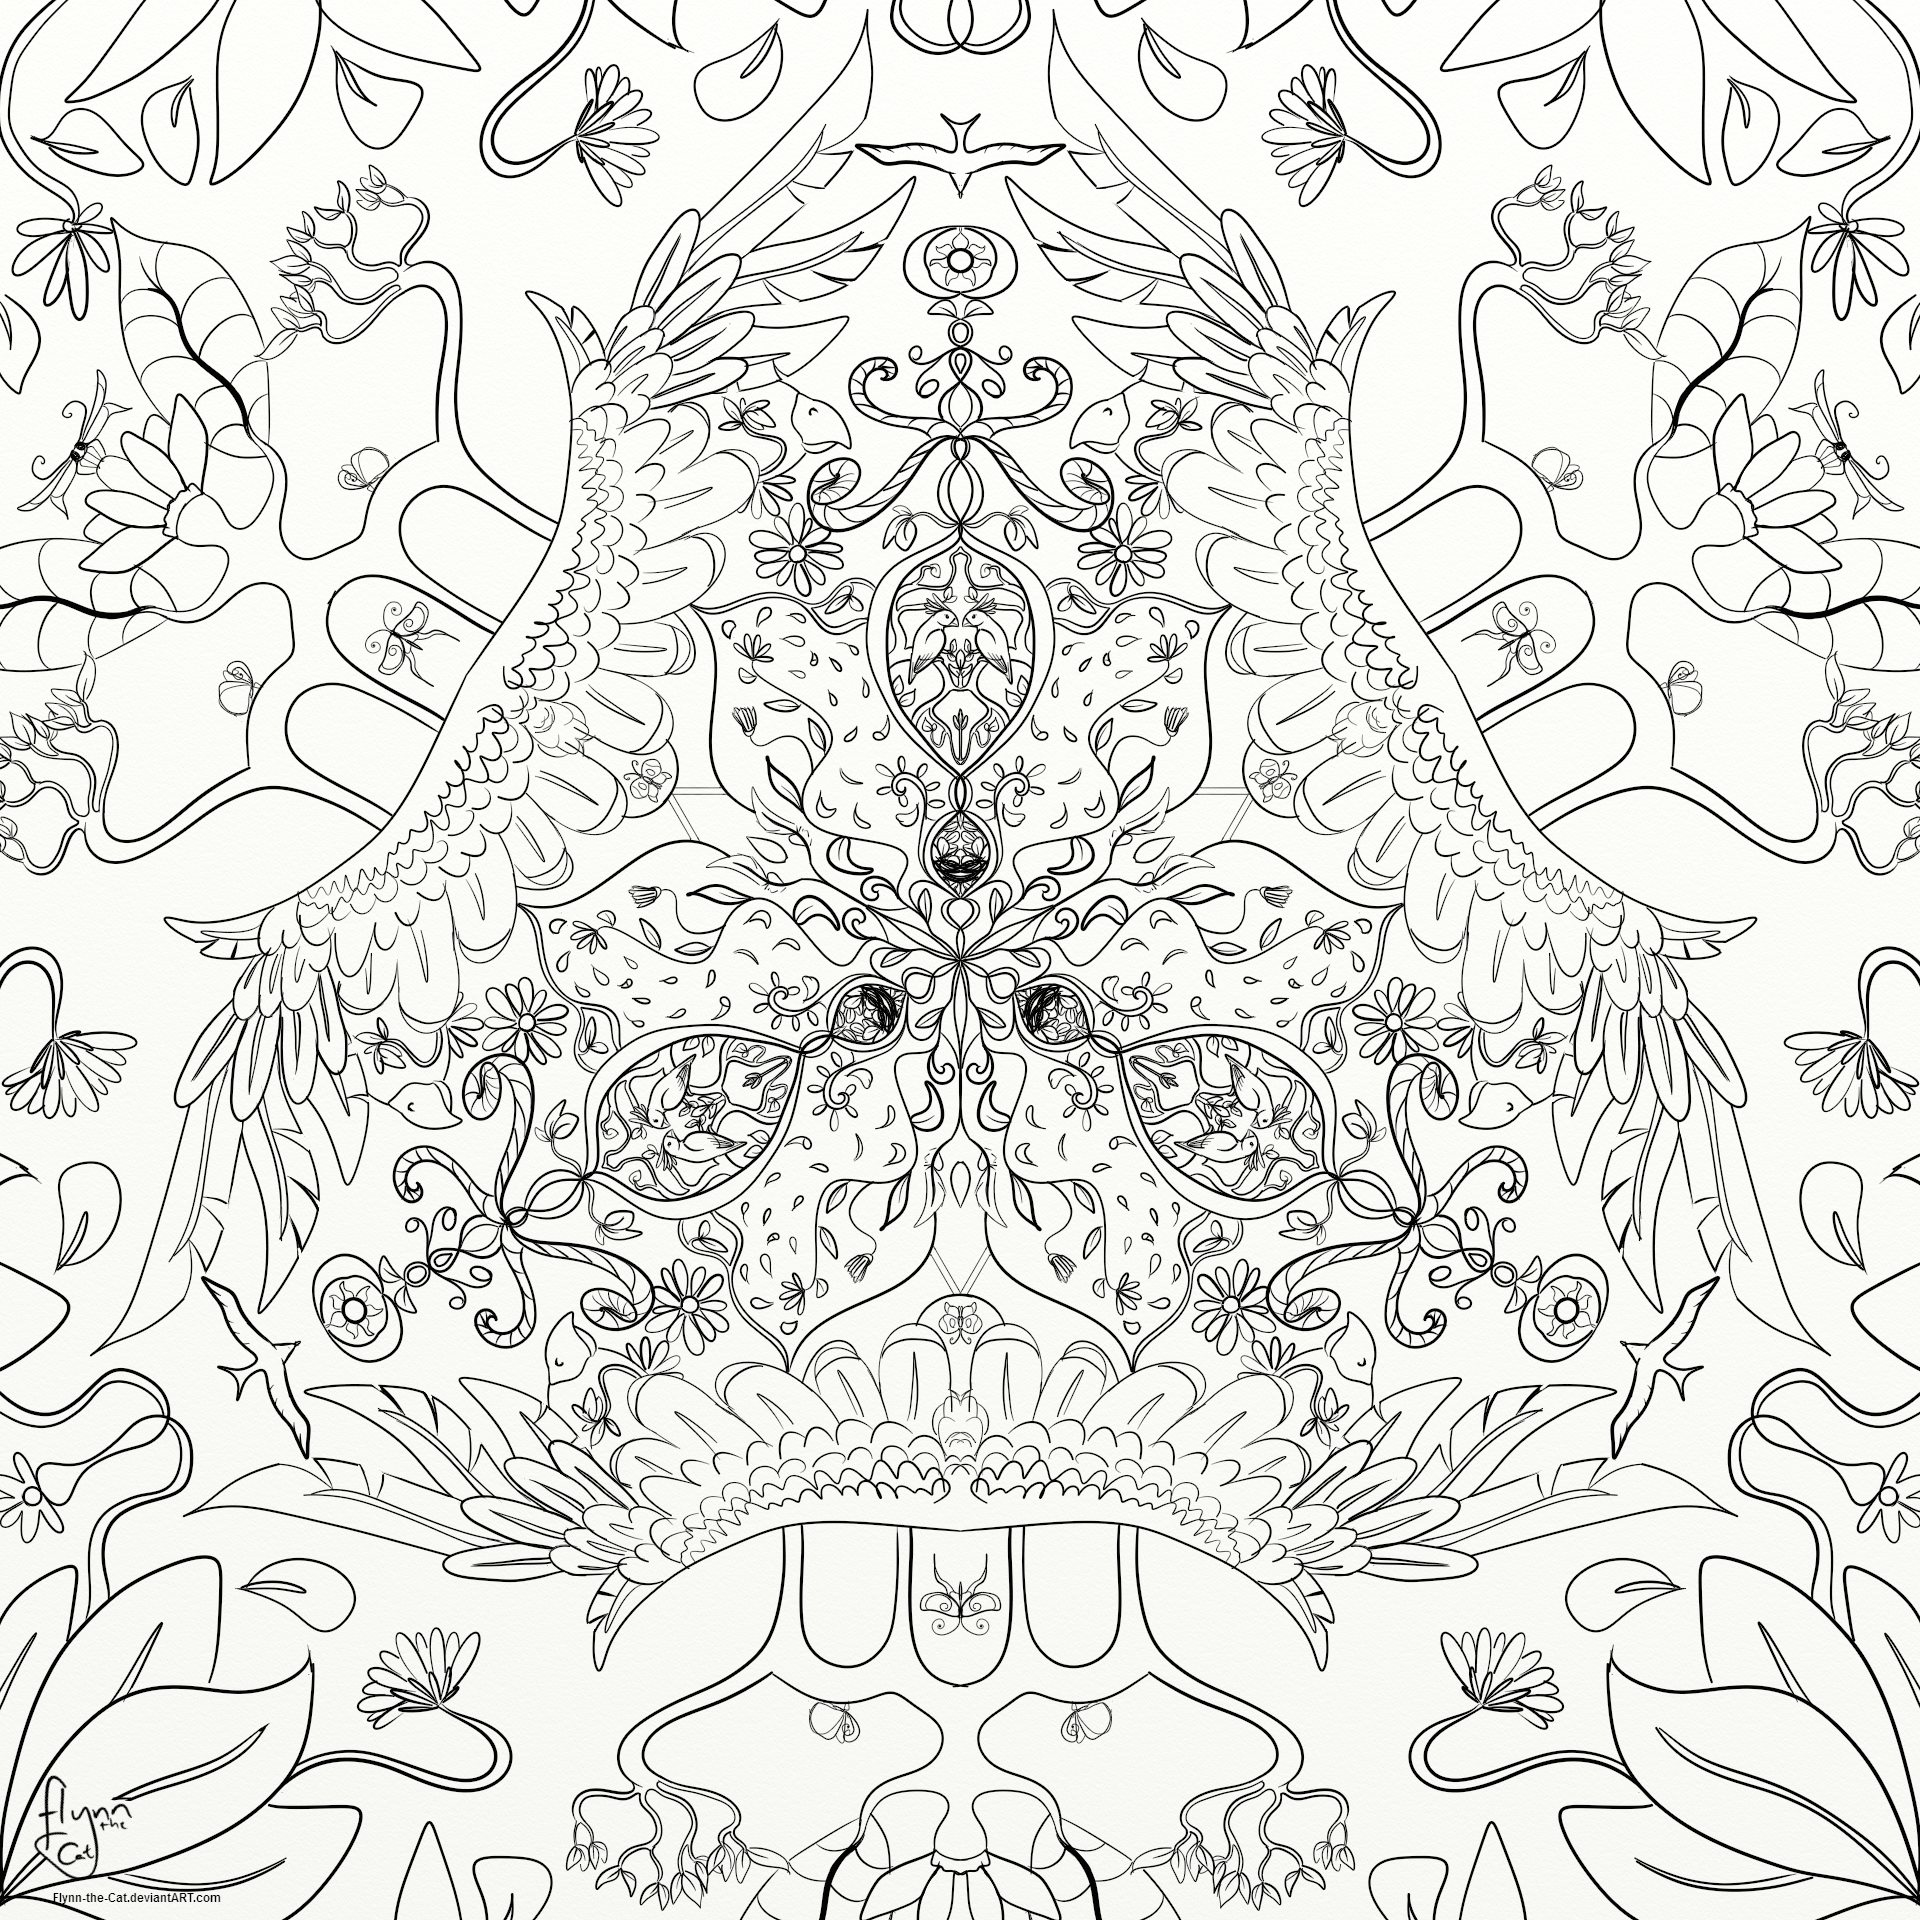 s line of symmetry coloring pages - photo #34